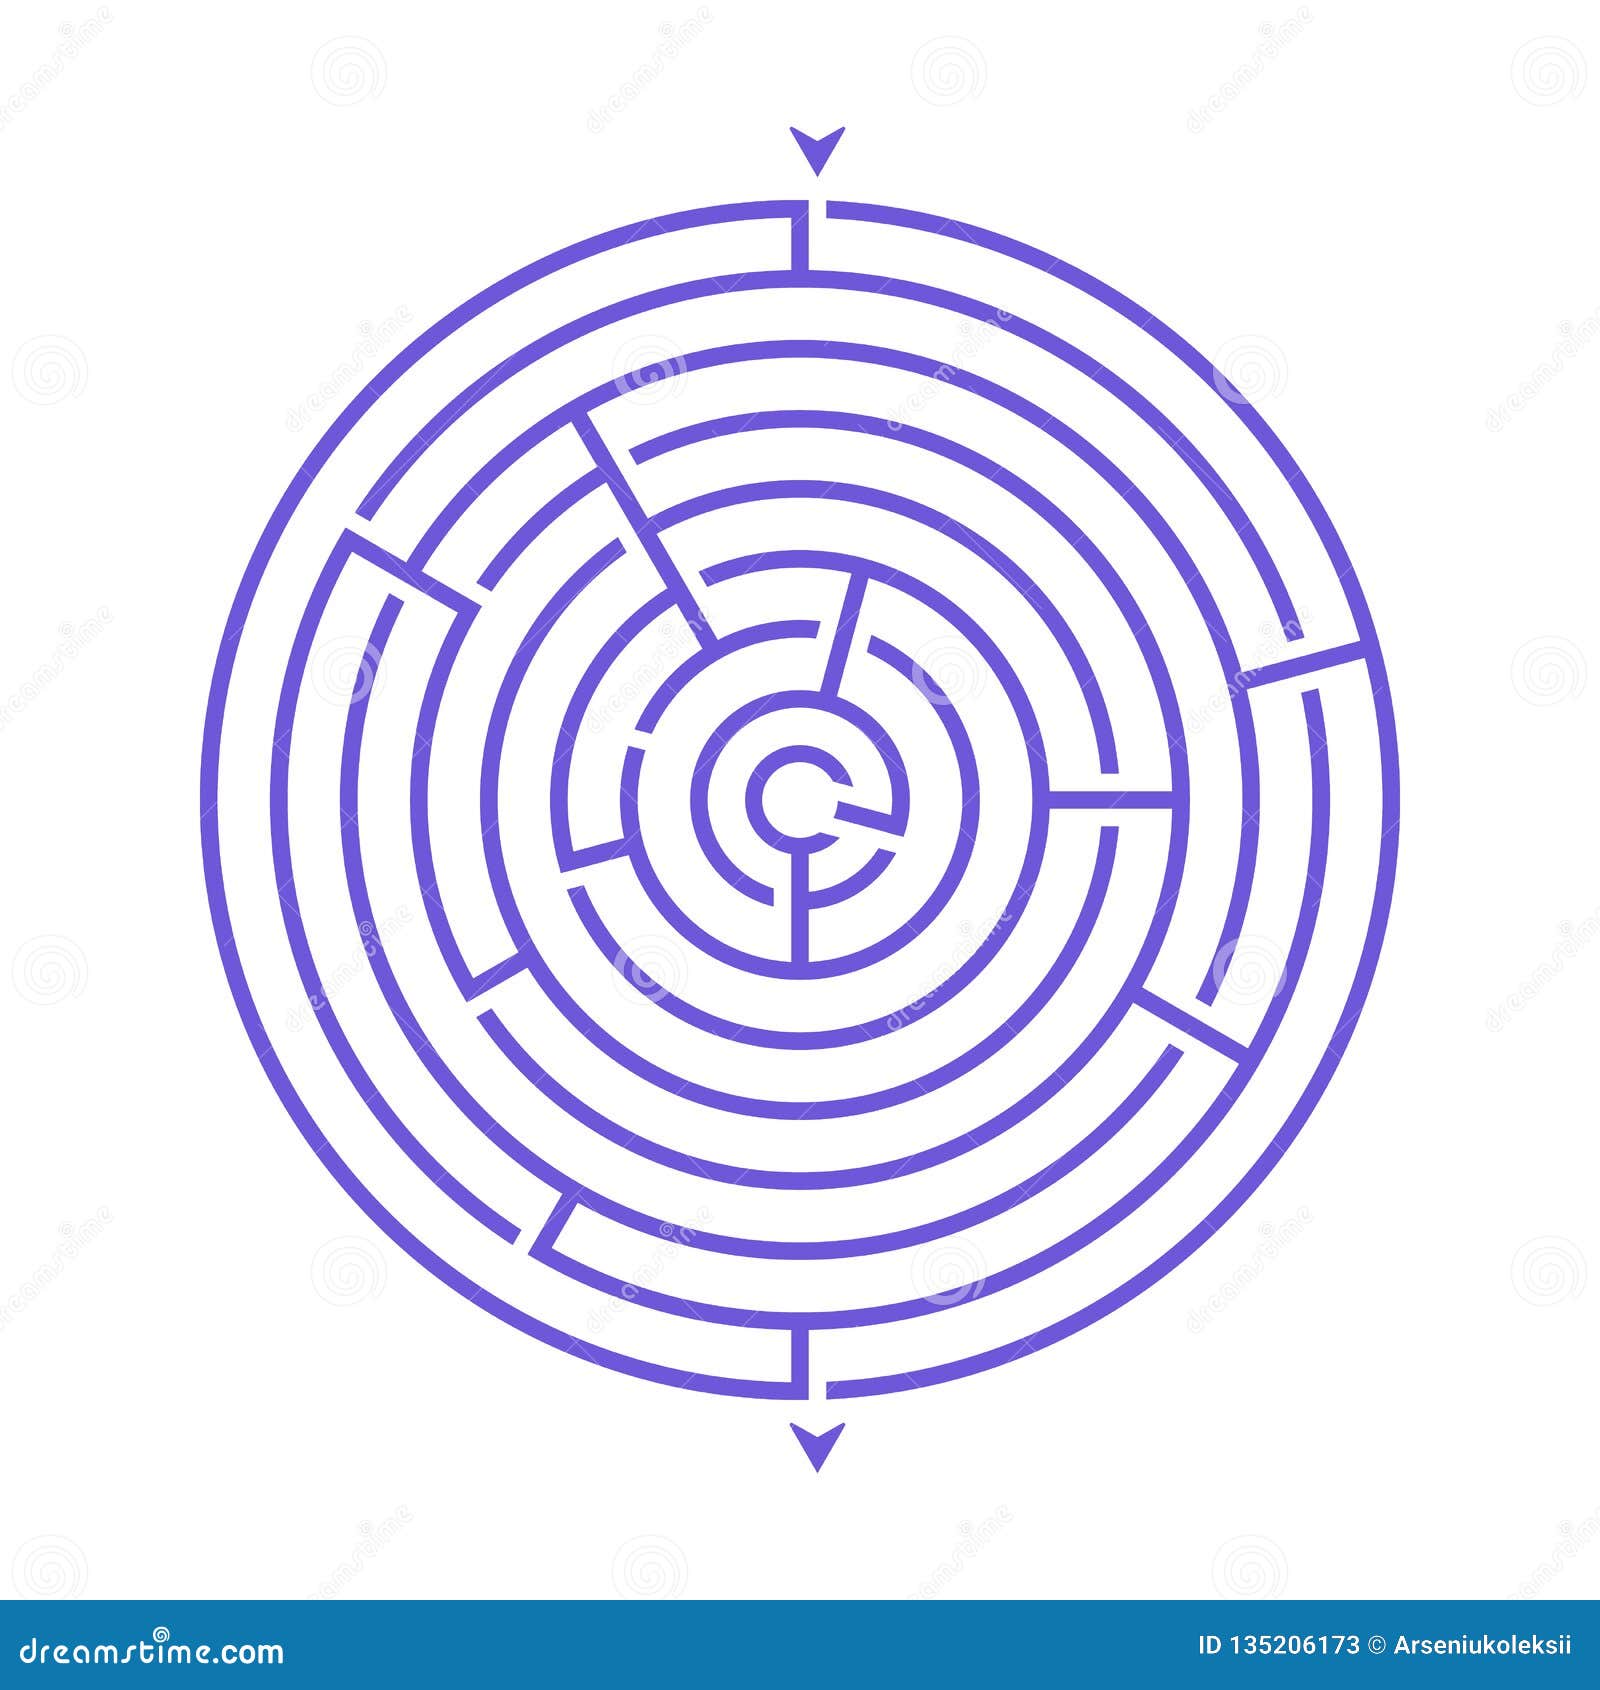 simple round maze labyrinth game for kids. one of the puzzles from the set of child riddles